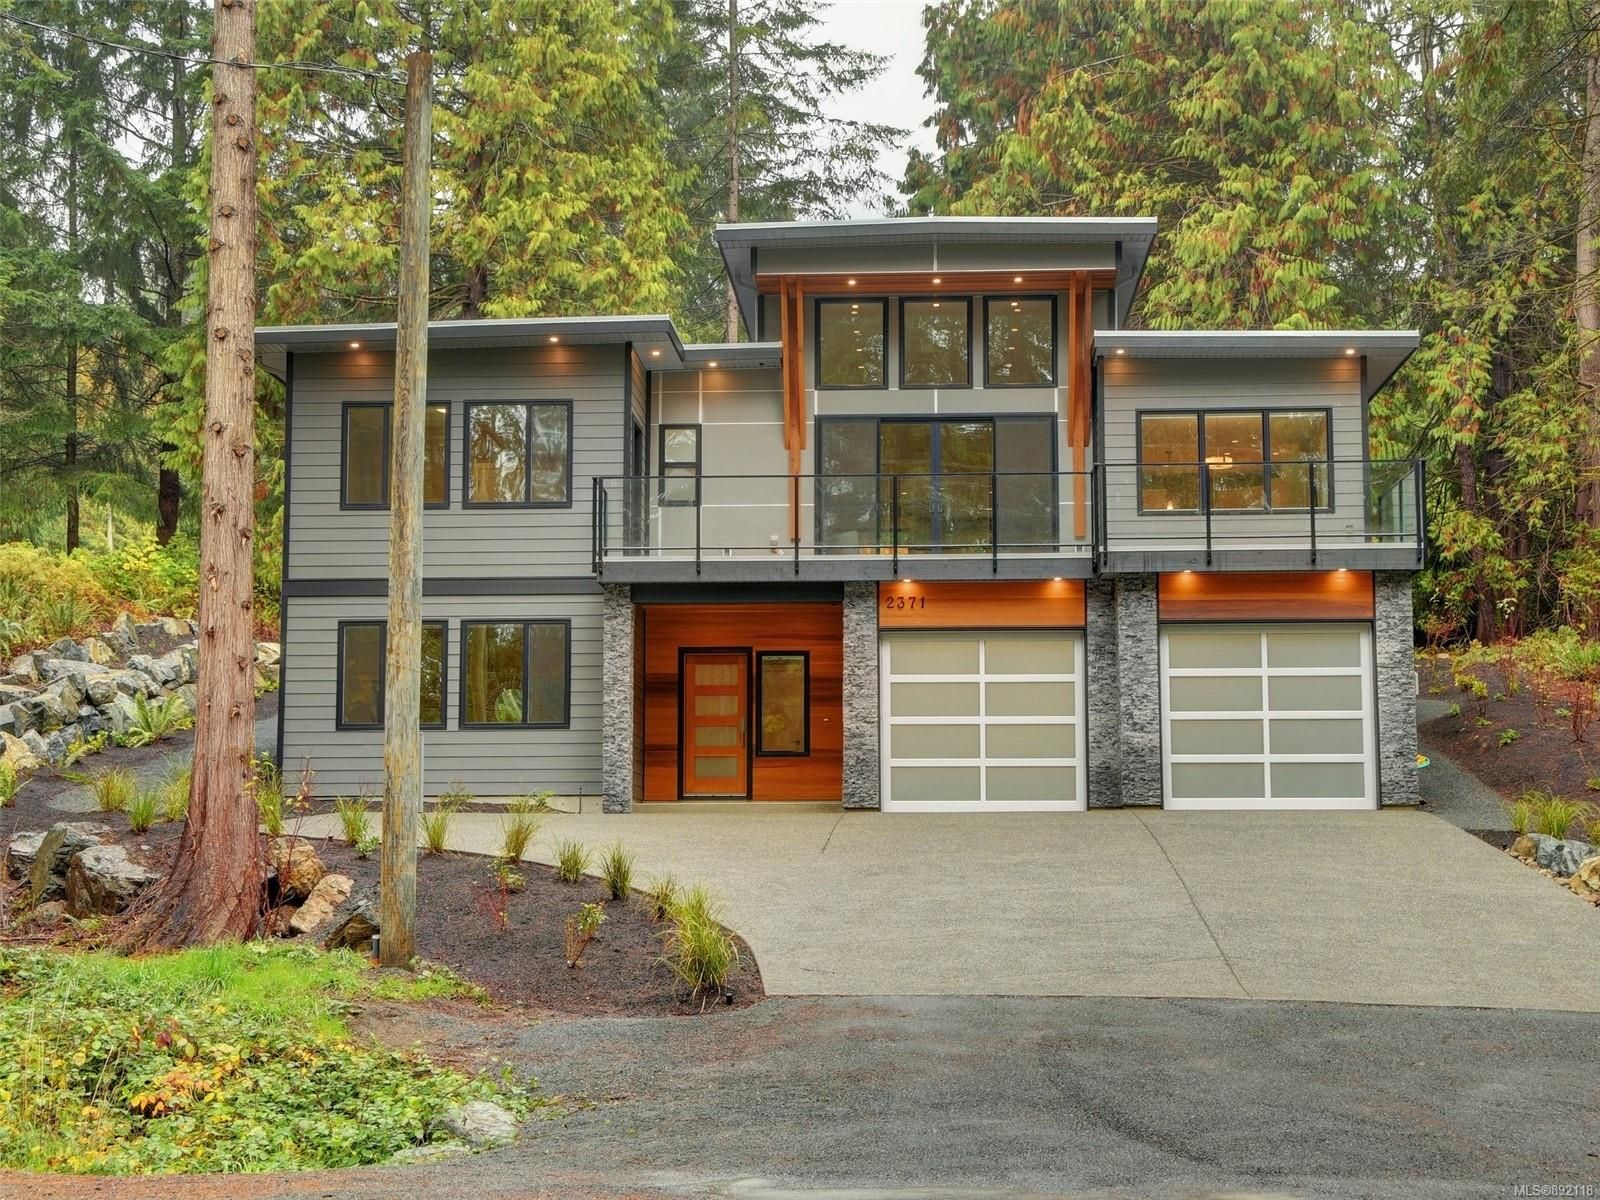 New property listed in ML Shawnigan, Malahat & Area